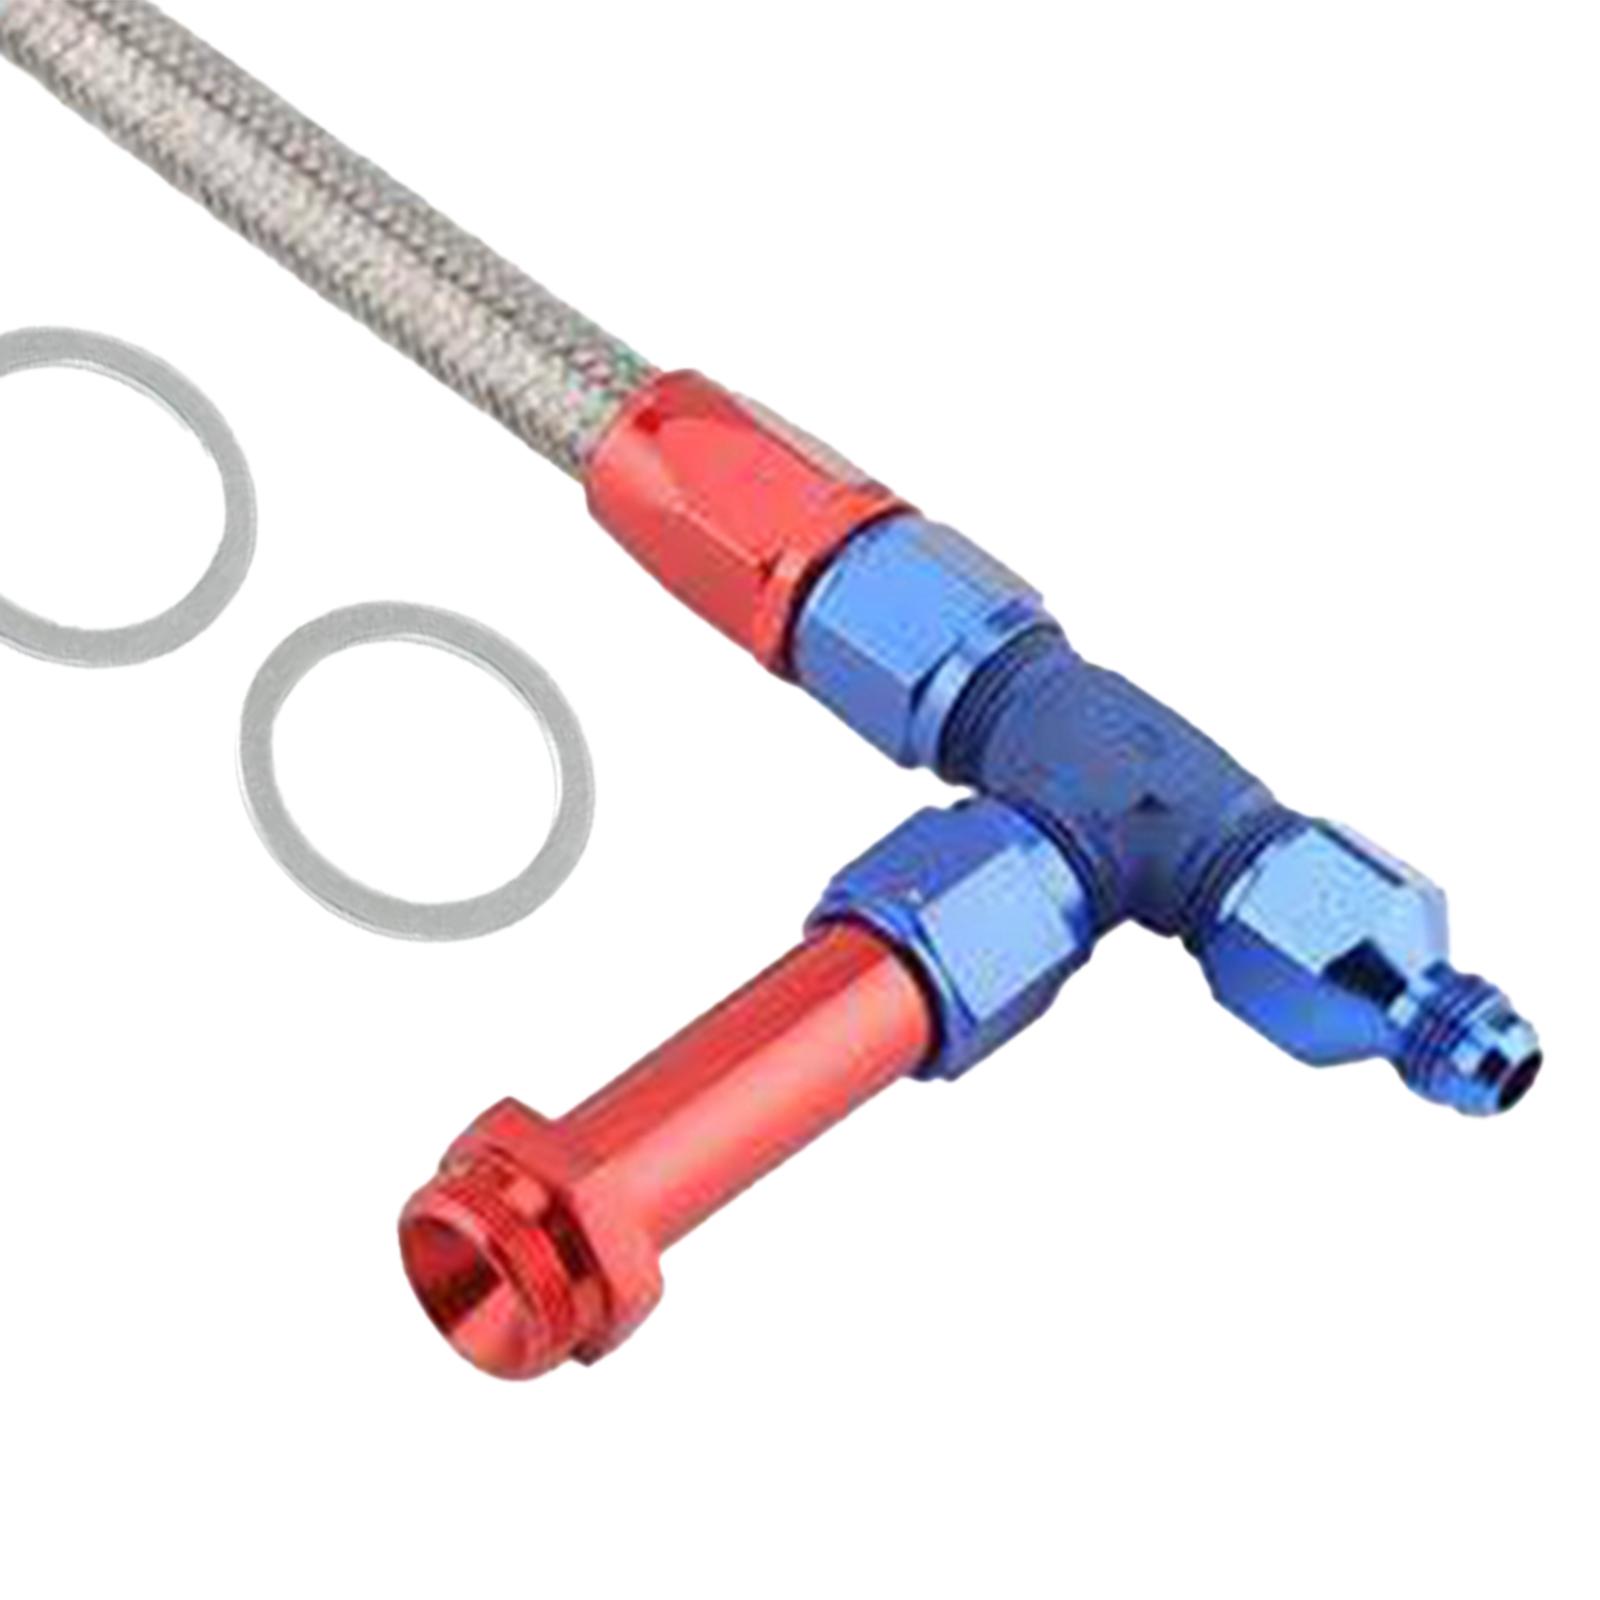 Dual feed Fuel Line for 4150 Premium Replaces Durable Universal for Aed Red Blue